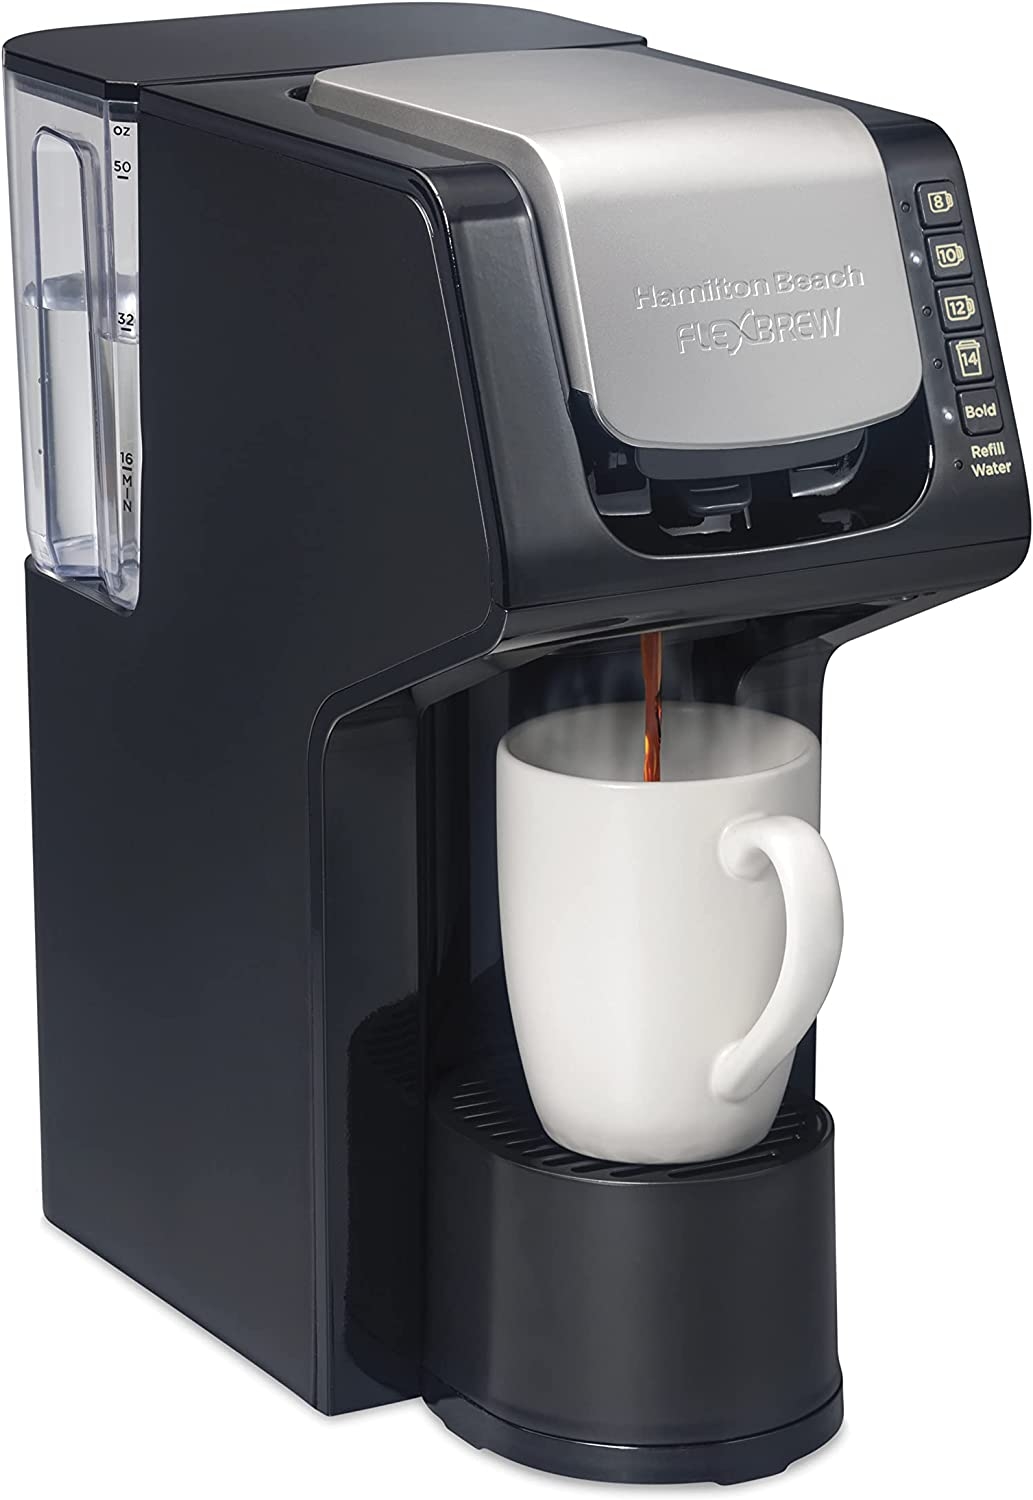 Hamilton Beach Gen 4 FlexBrew Single-Serve Coffee Maker with Removable Reservoir, Compatible with Pod Packs and Grounds, 50 oz.,